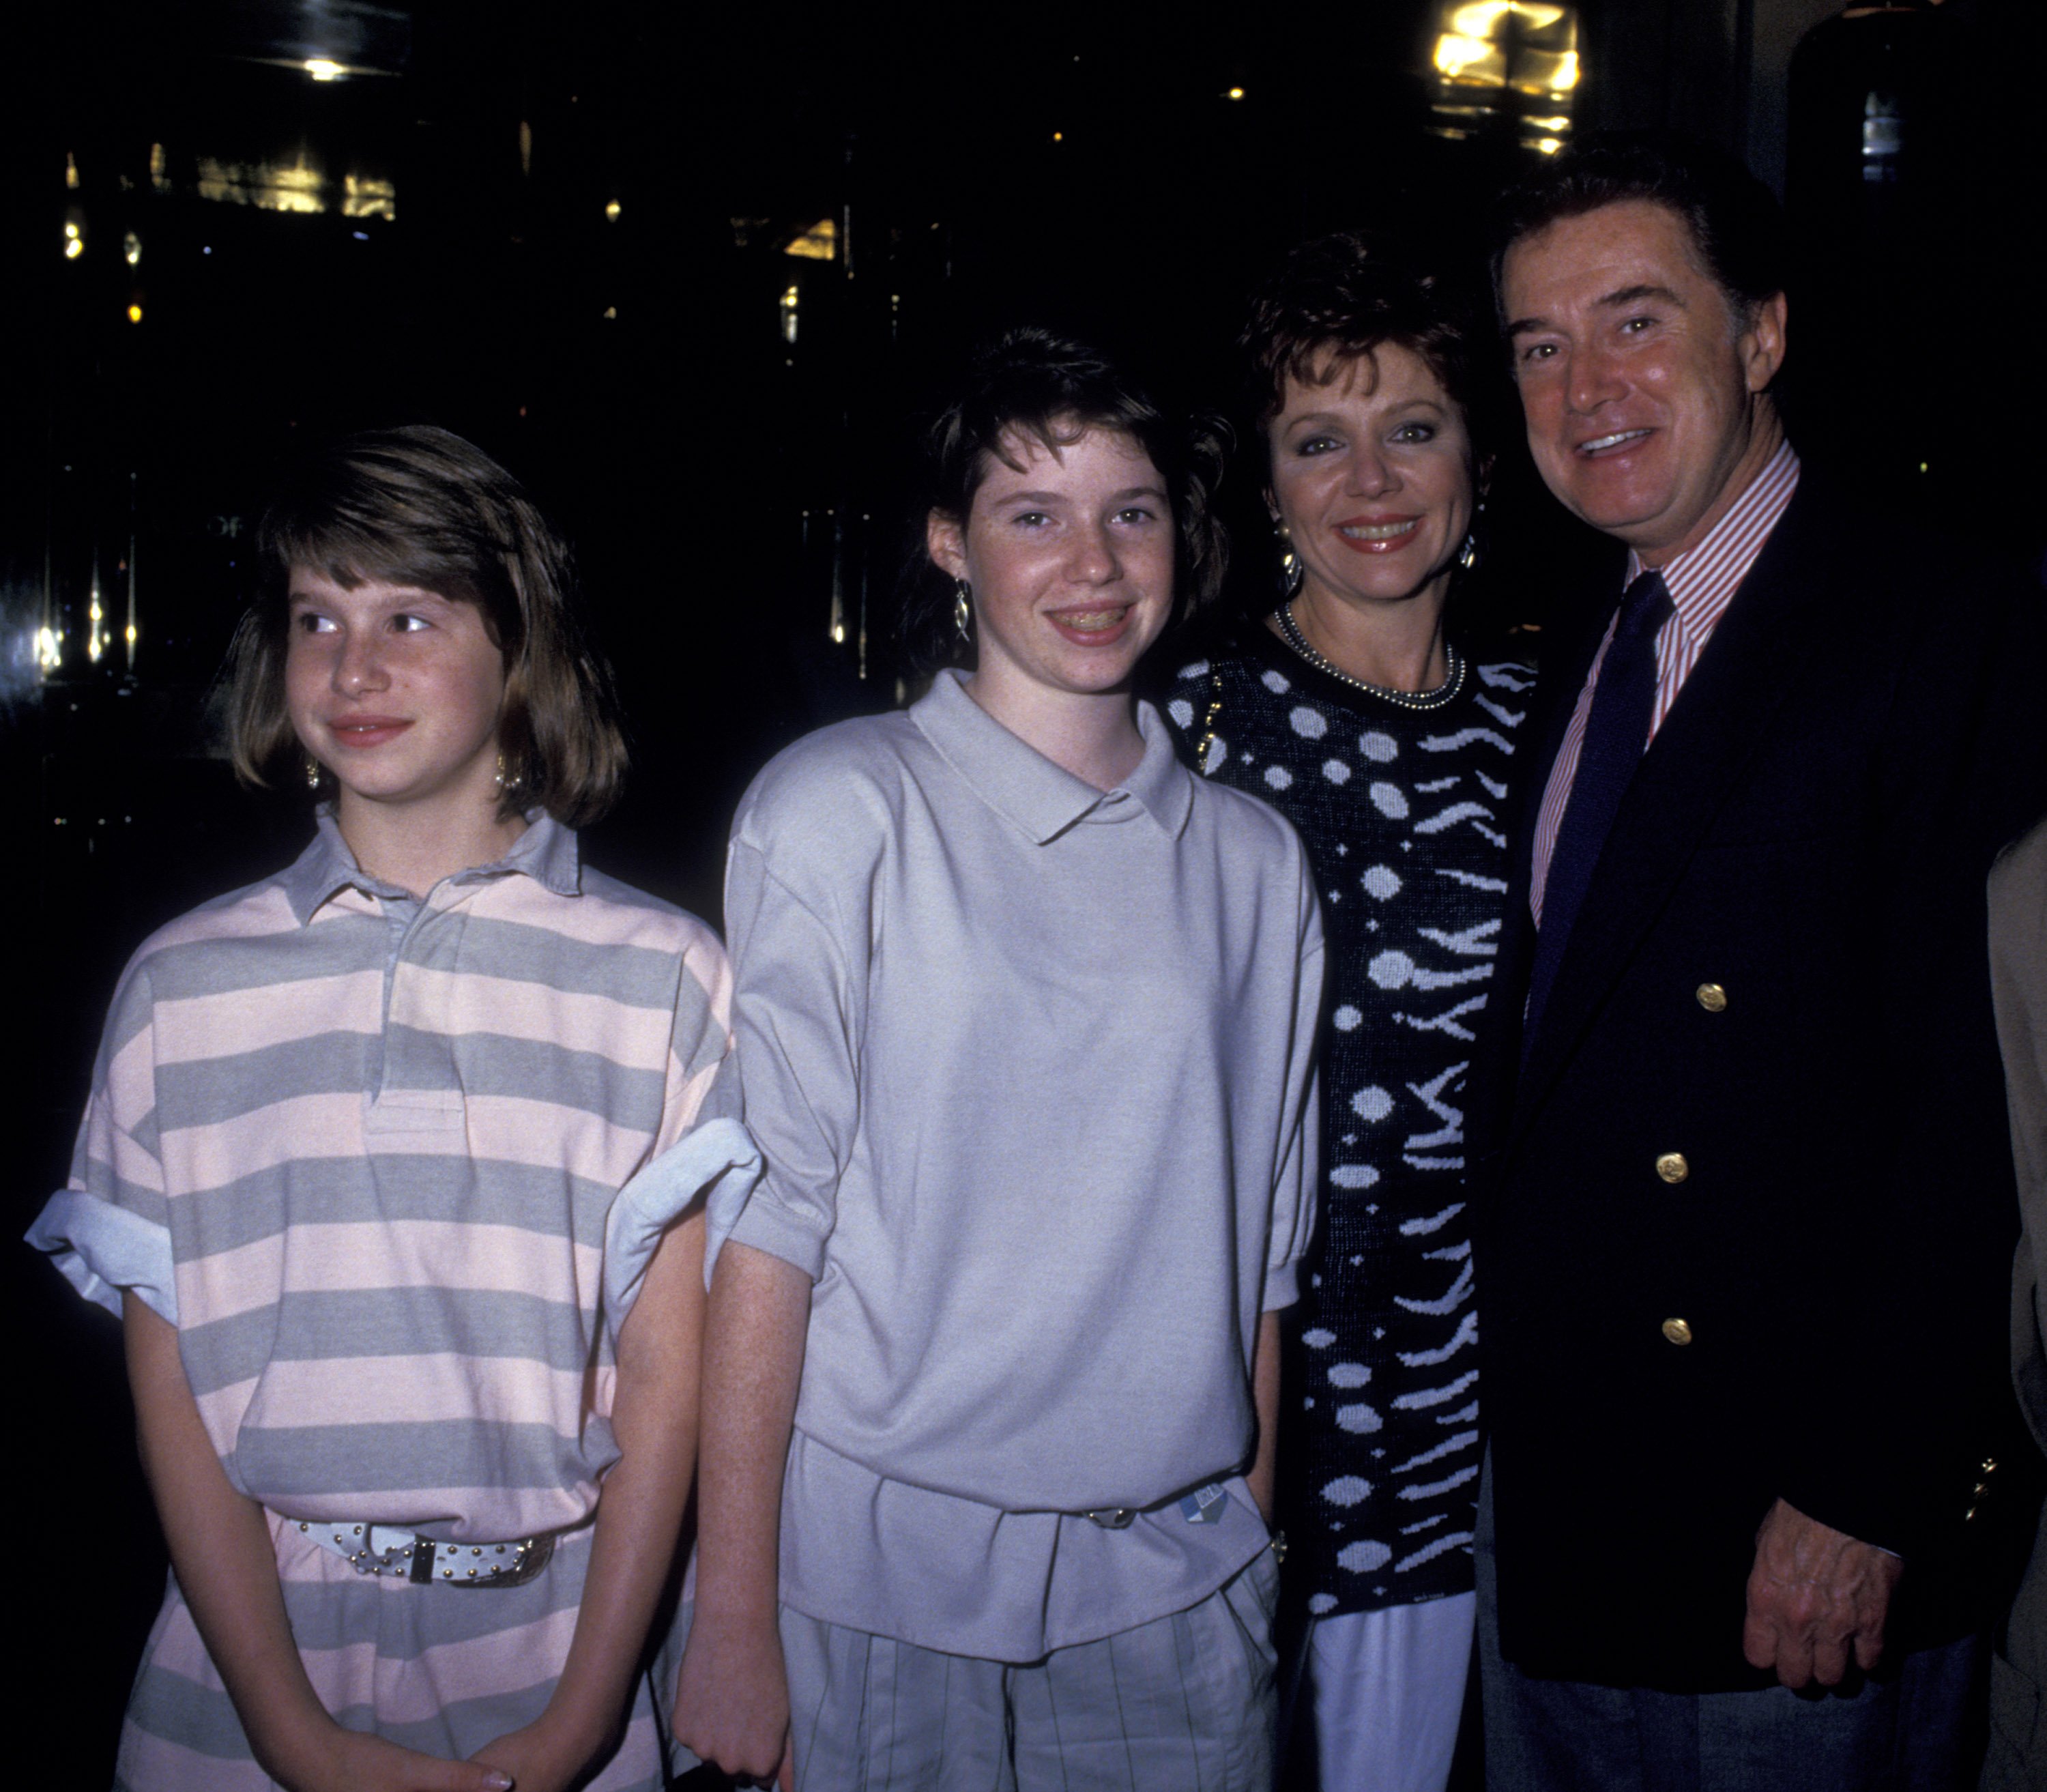 Regis Philbin and Joy Philbin with their daughters Joanna and Jennifer at the premiere party for "The Monster Squad" on June 3, 1987, in New York | Source: Getty Images